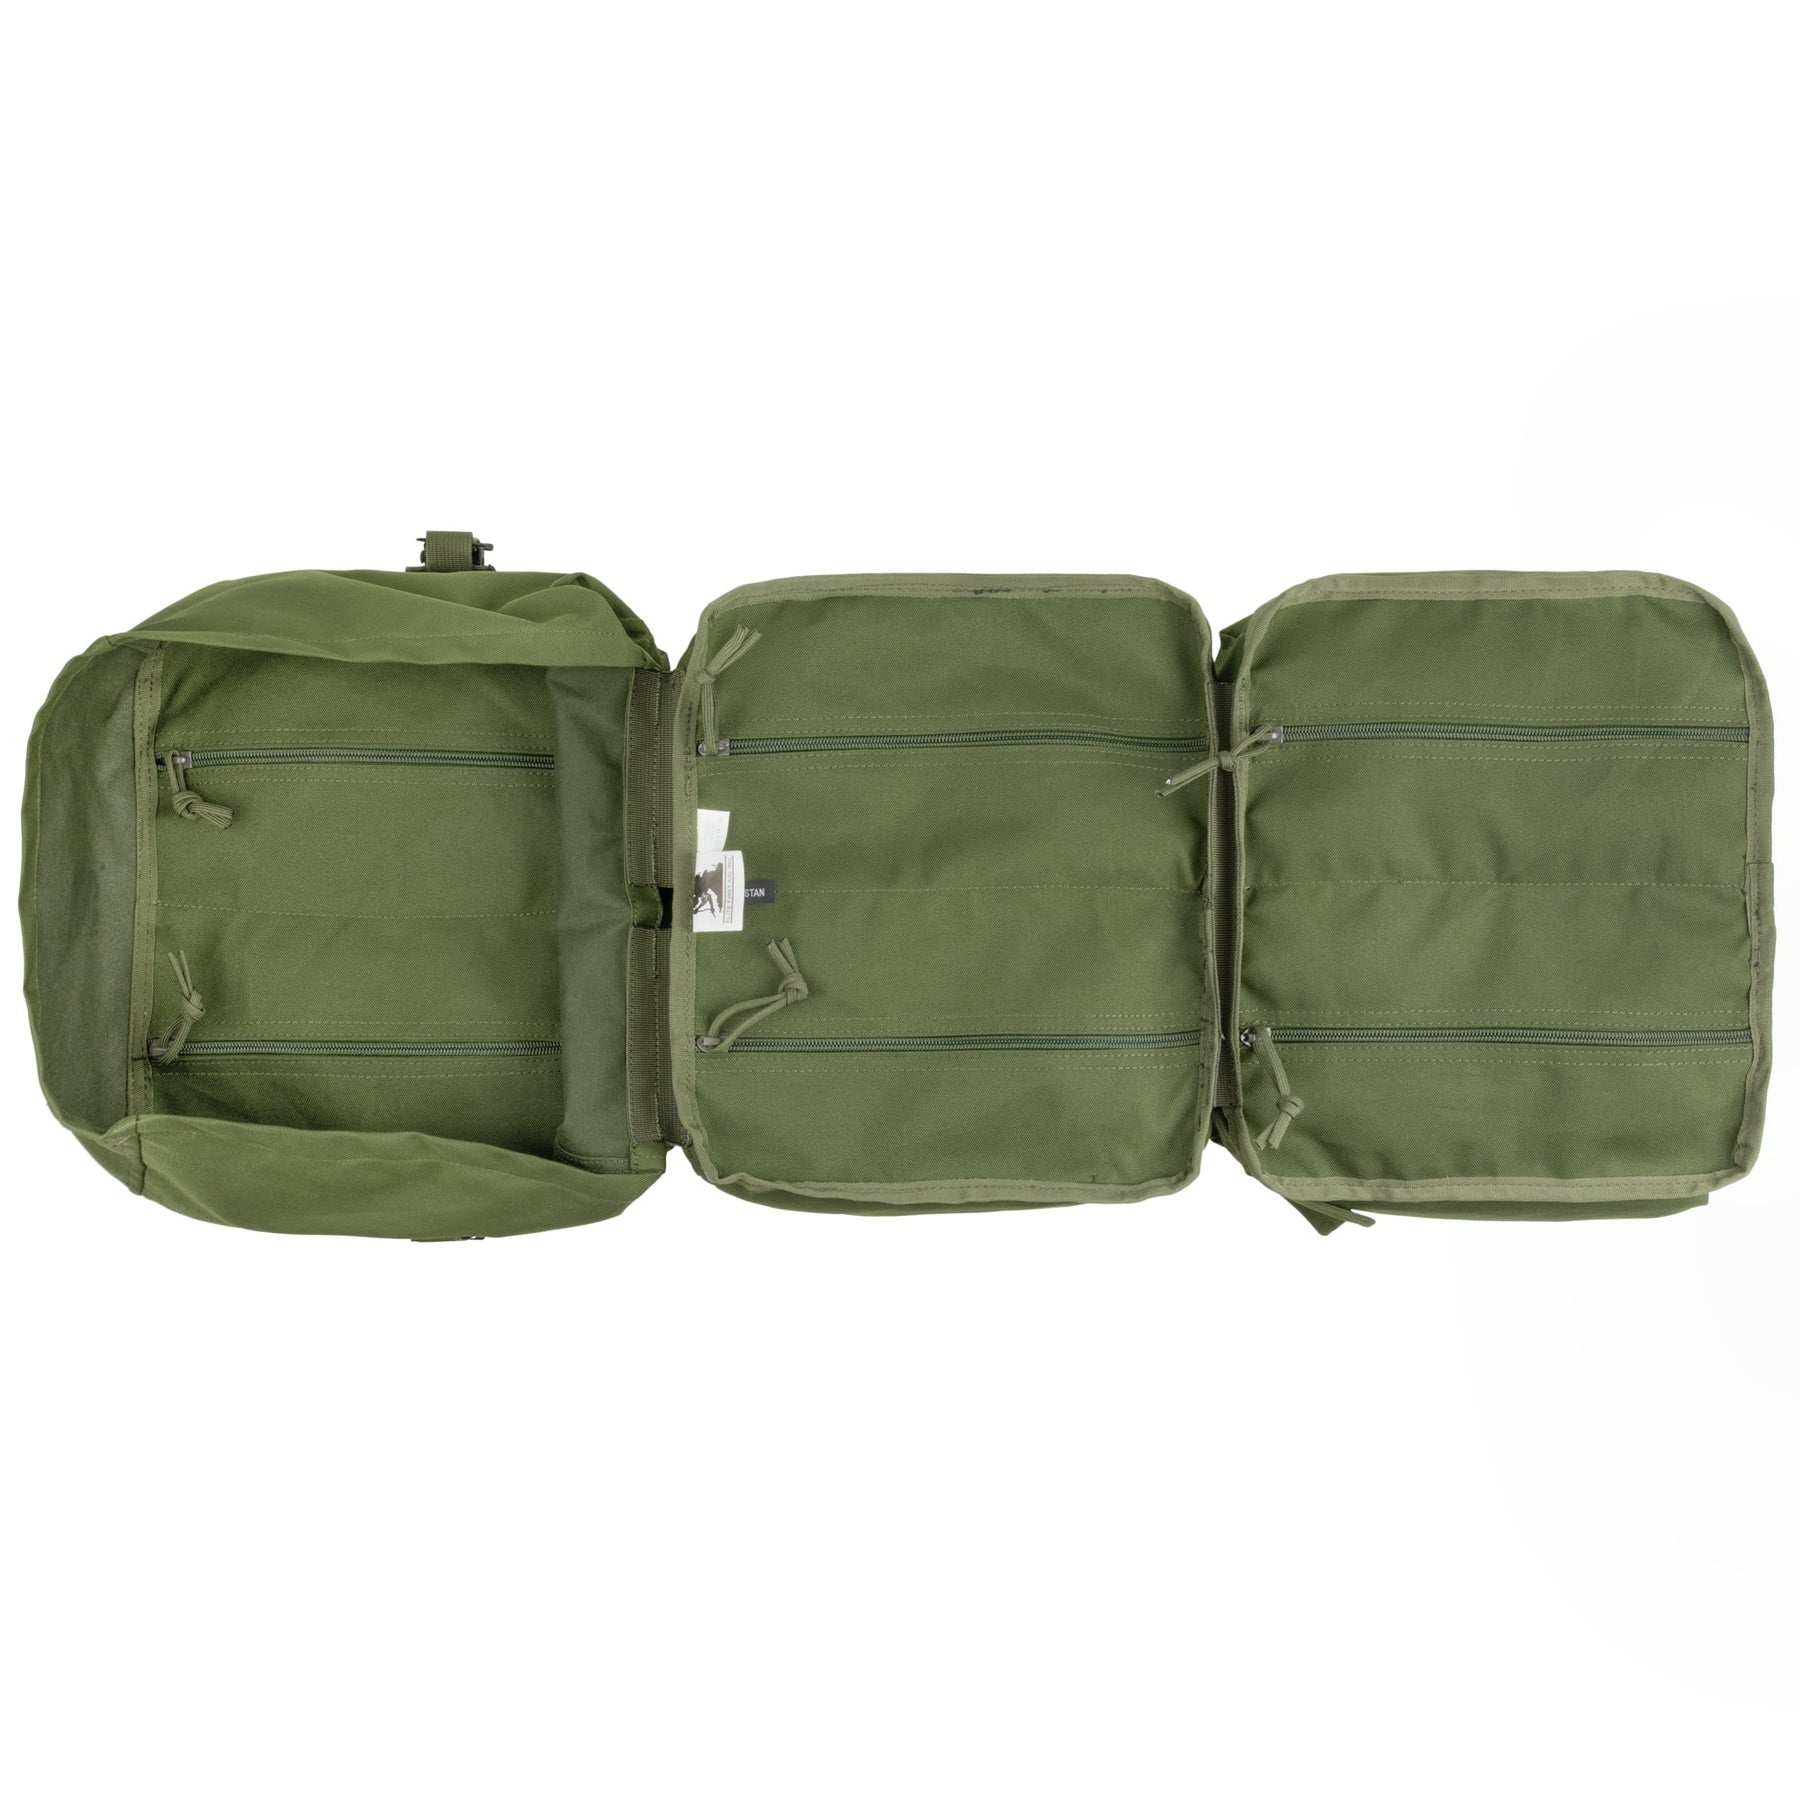 M-17 Medic Bag | Complete First-Aid Field Kit